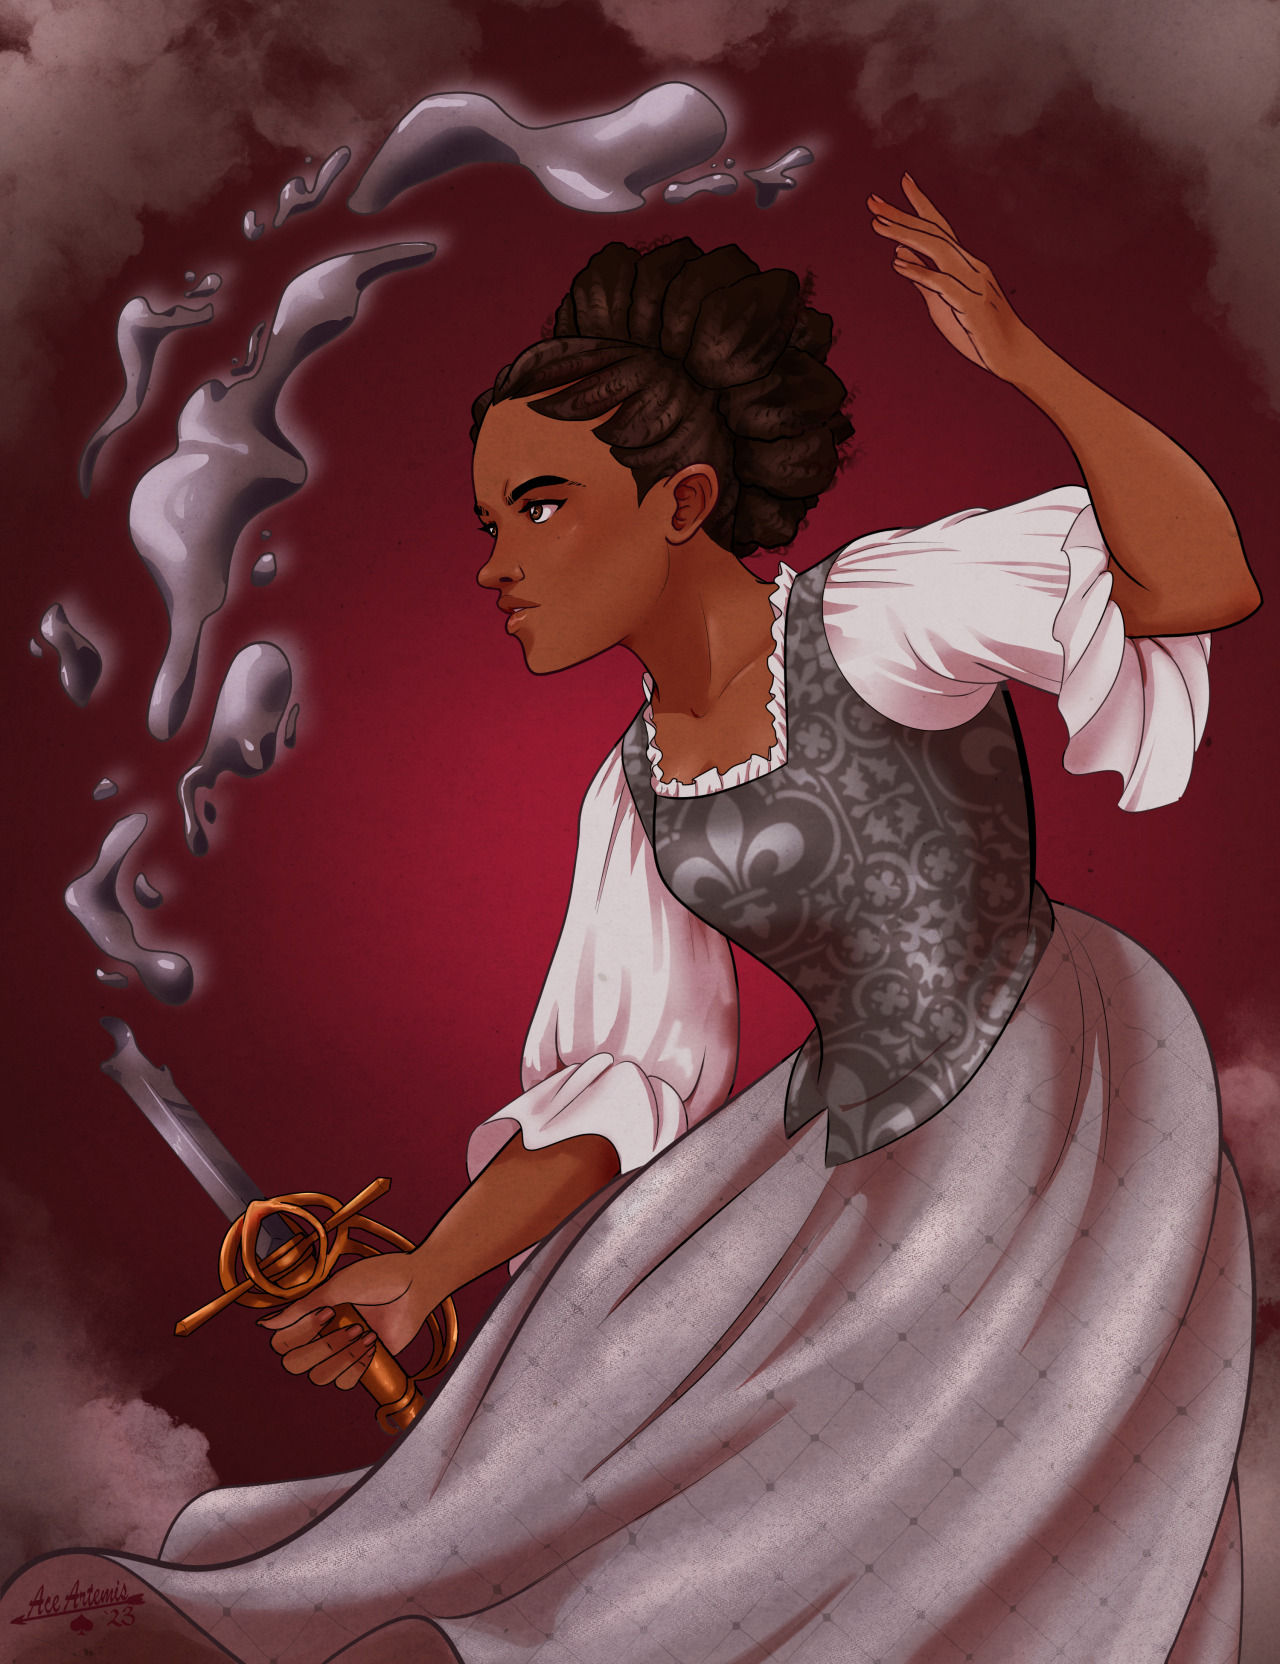 ace-artemis-fanartist:
“Joan from That Self-Same Metal by Brittany N. Williams.
This was one of my top fave books of this year! It has queer characters, monstrous fae, metal magic, sword fighting ladies, and so much more!
”